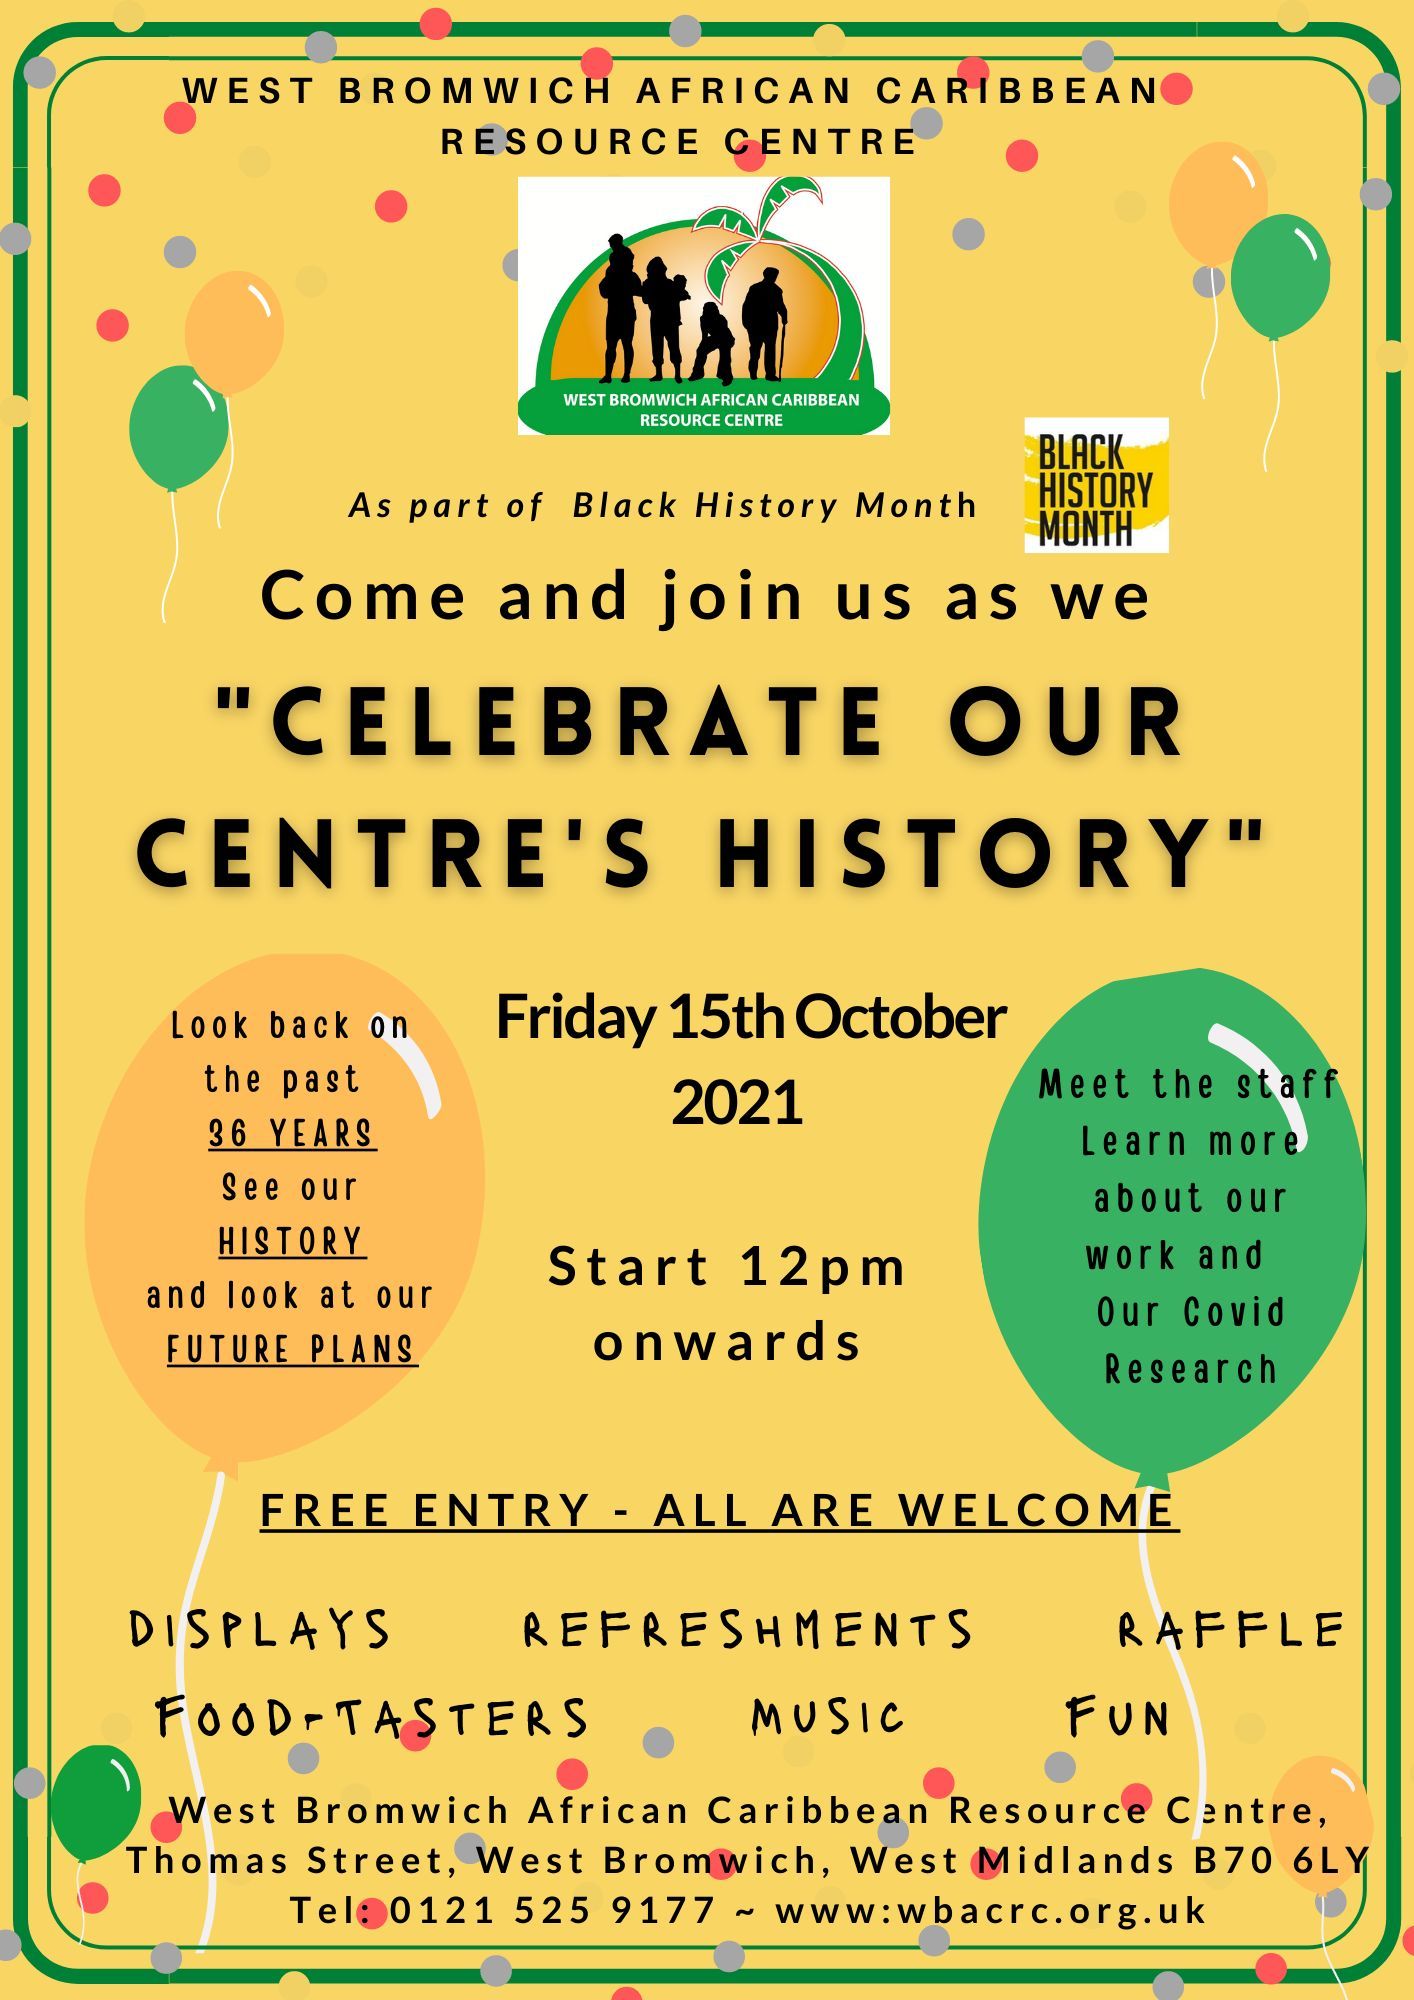 Celebrating Our Centre's History